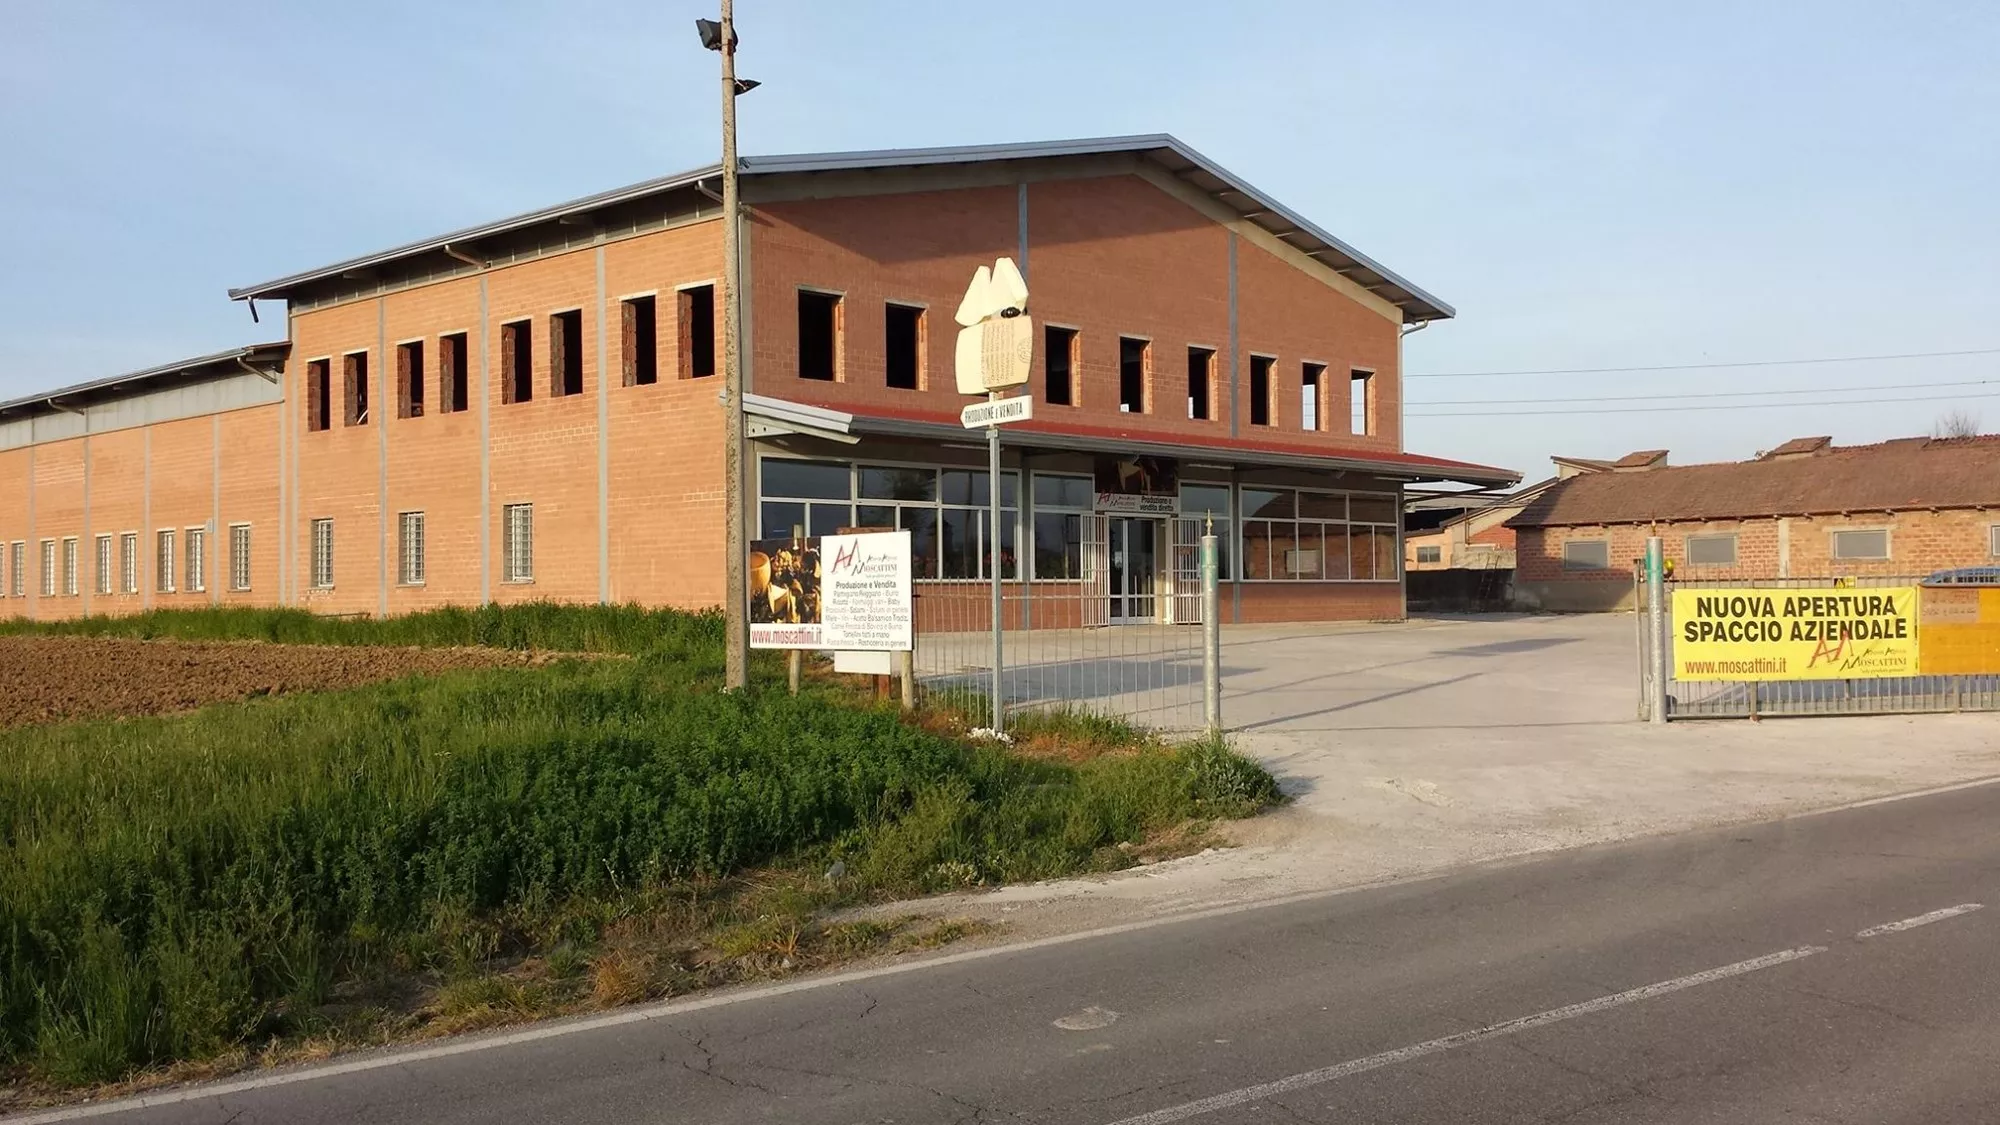 Azienda Agricola Moscattini in Italy, Europe | Cheesemakers - Rated 4